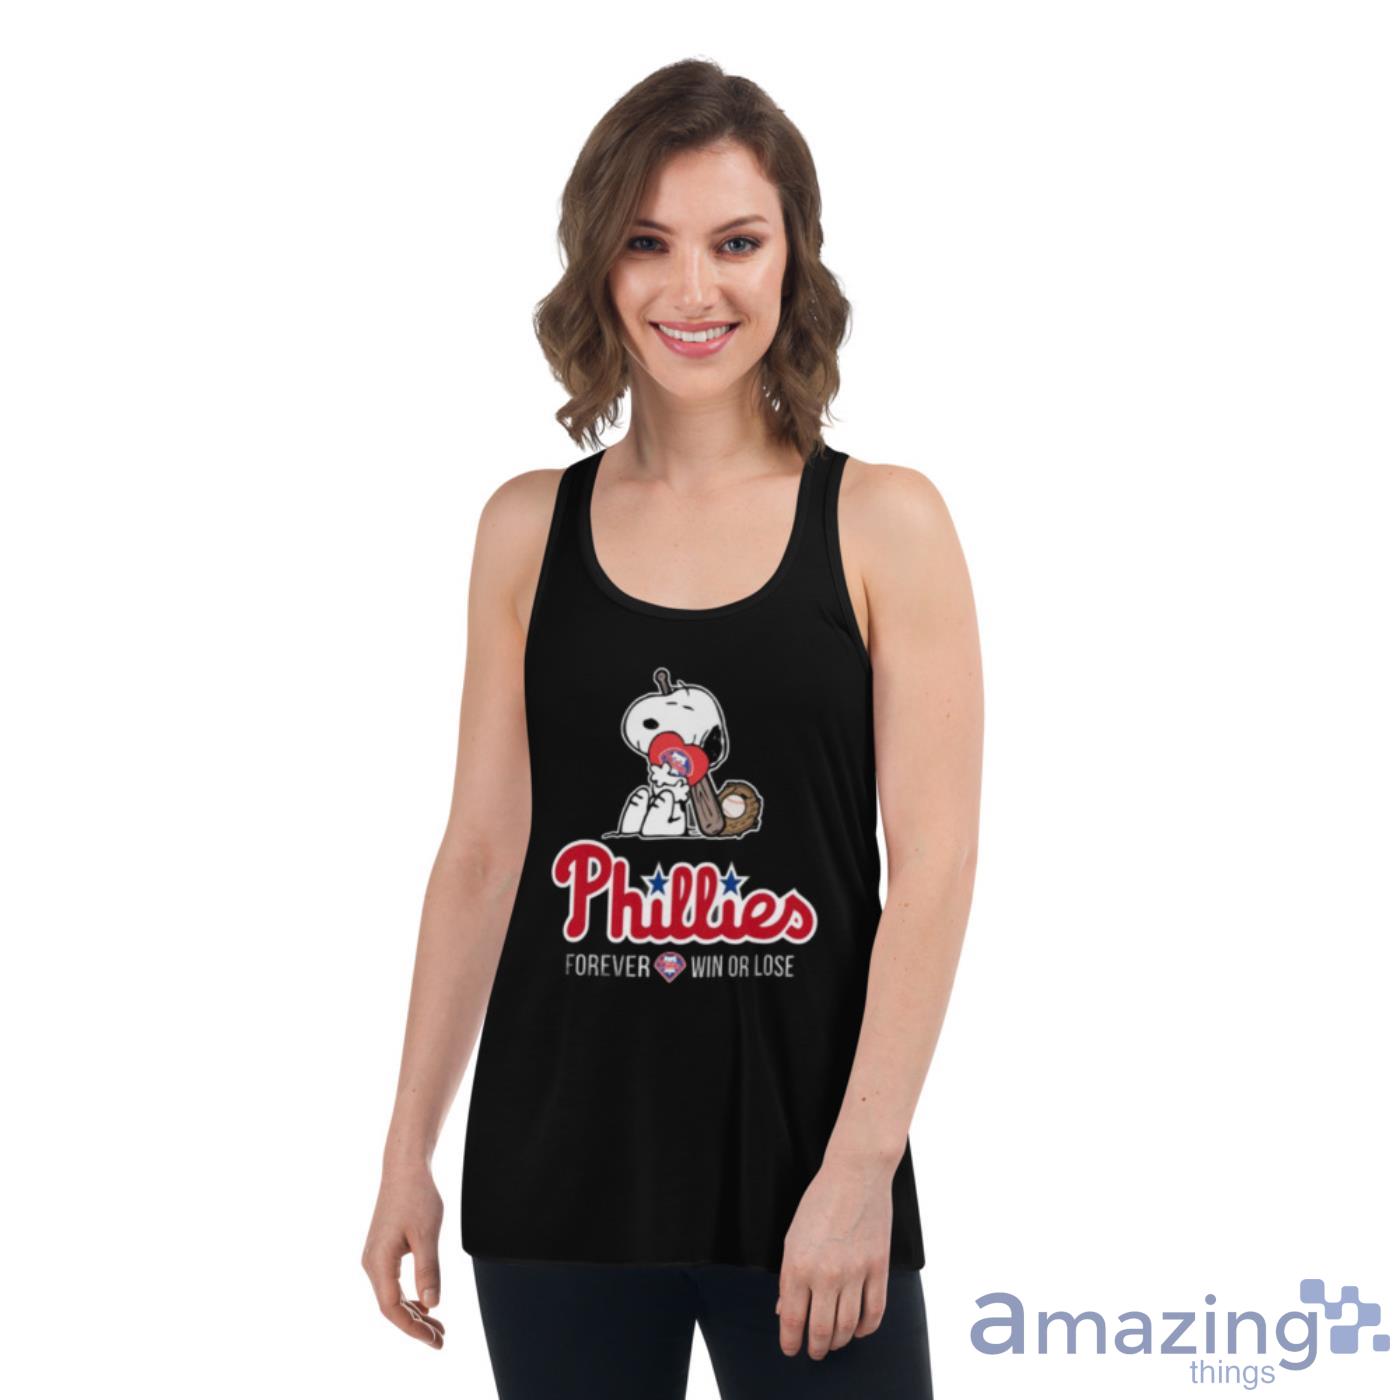 The Peanuts Time For Halloween And The Love For Philadelphia Phillies  Baseball Shirt, hoodie, sweater, long sleeve and tank top